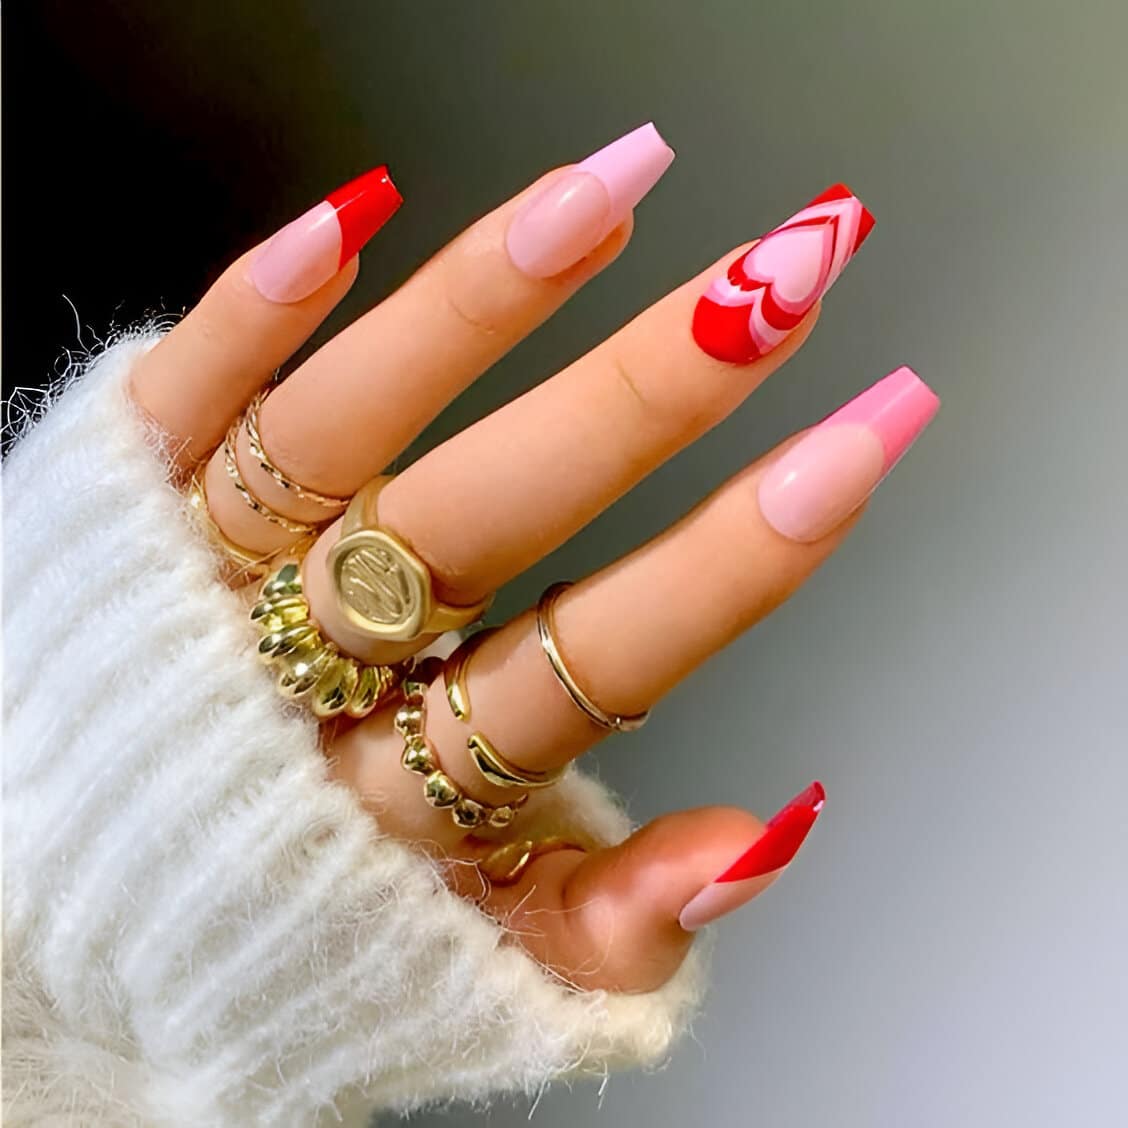 30 Irresistible Red Heart Nails For The Perfect Romantic Date 22